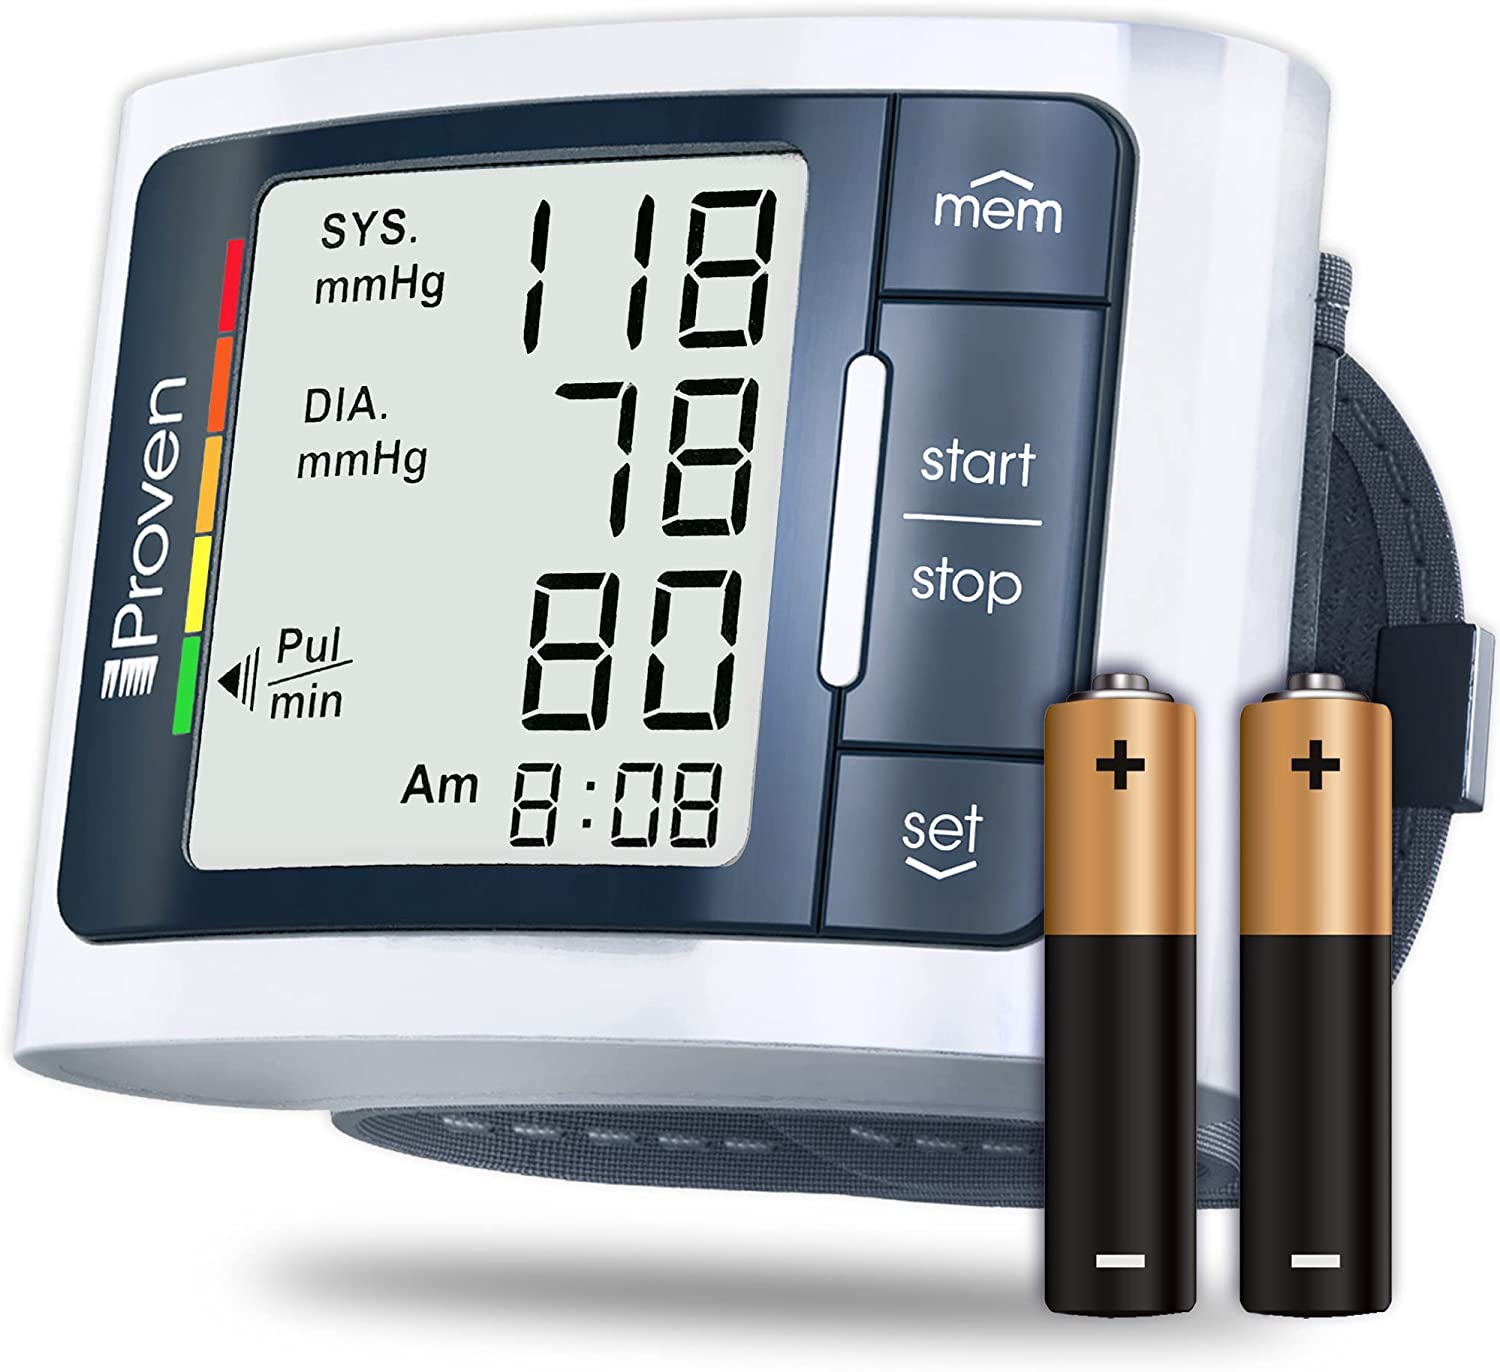 https://www.dontwasteyourmoney.com/wp-content/uploads/2019/12/iproven-clinically-accurate-fast-reading-wrist-blood-pressure-monitor.jpg